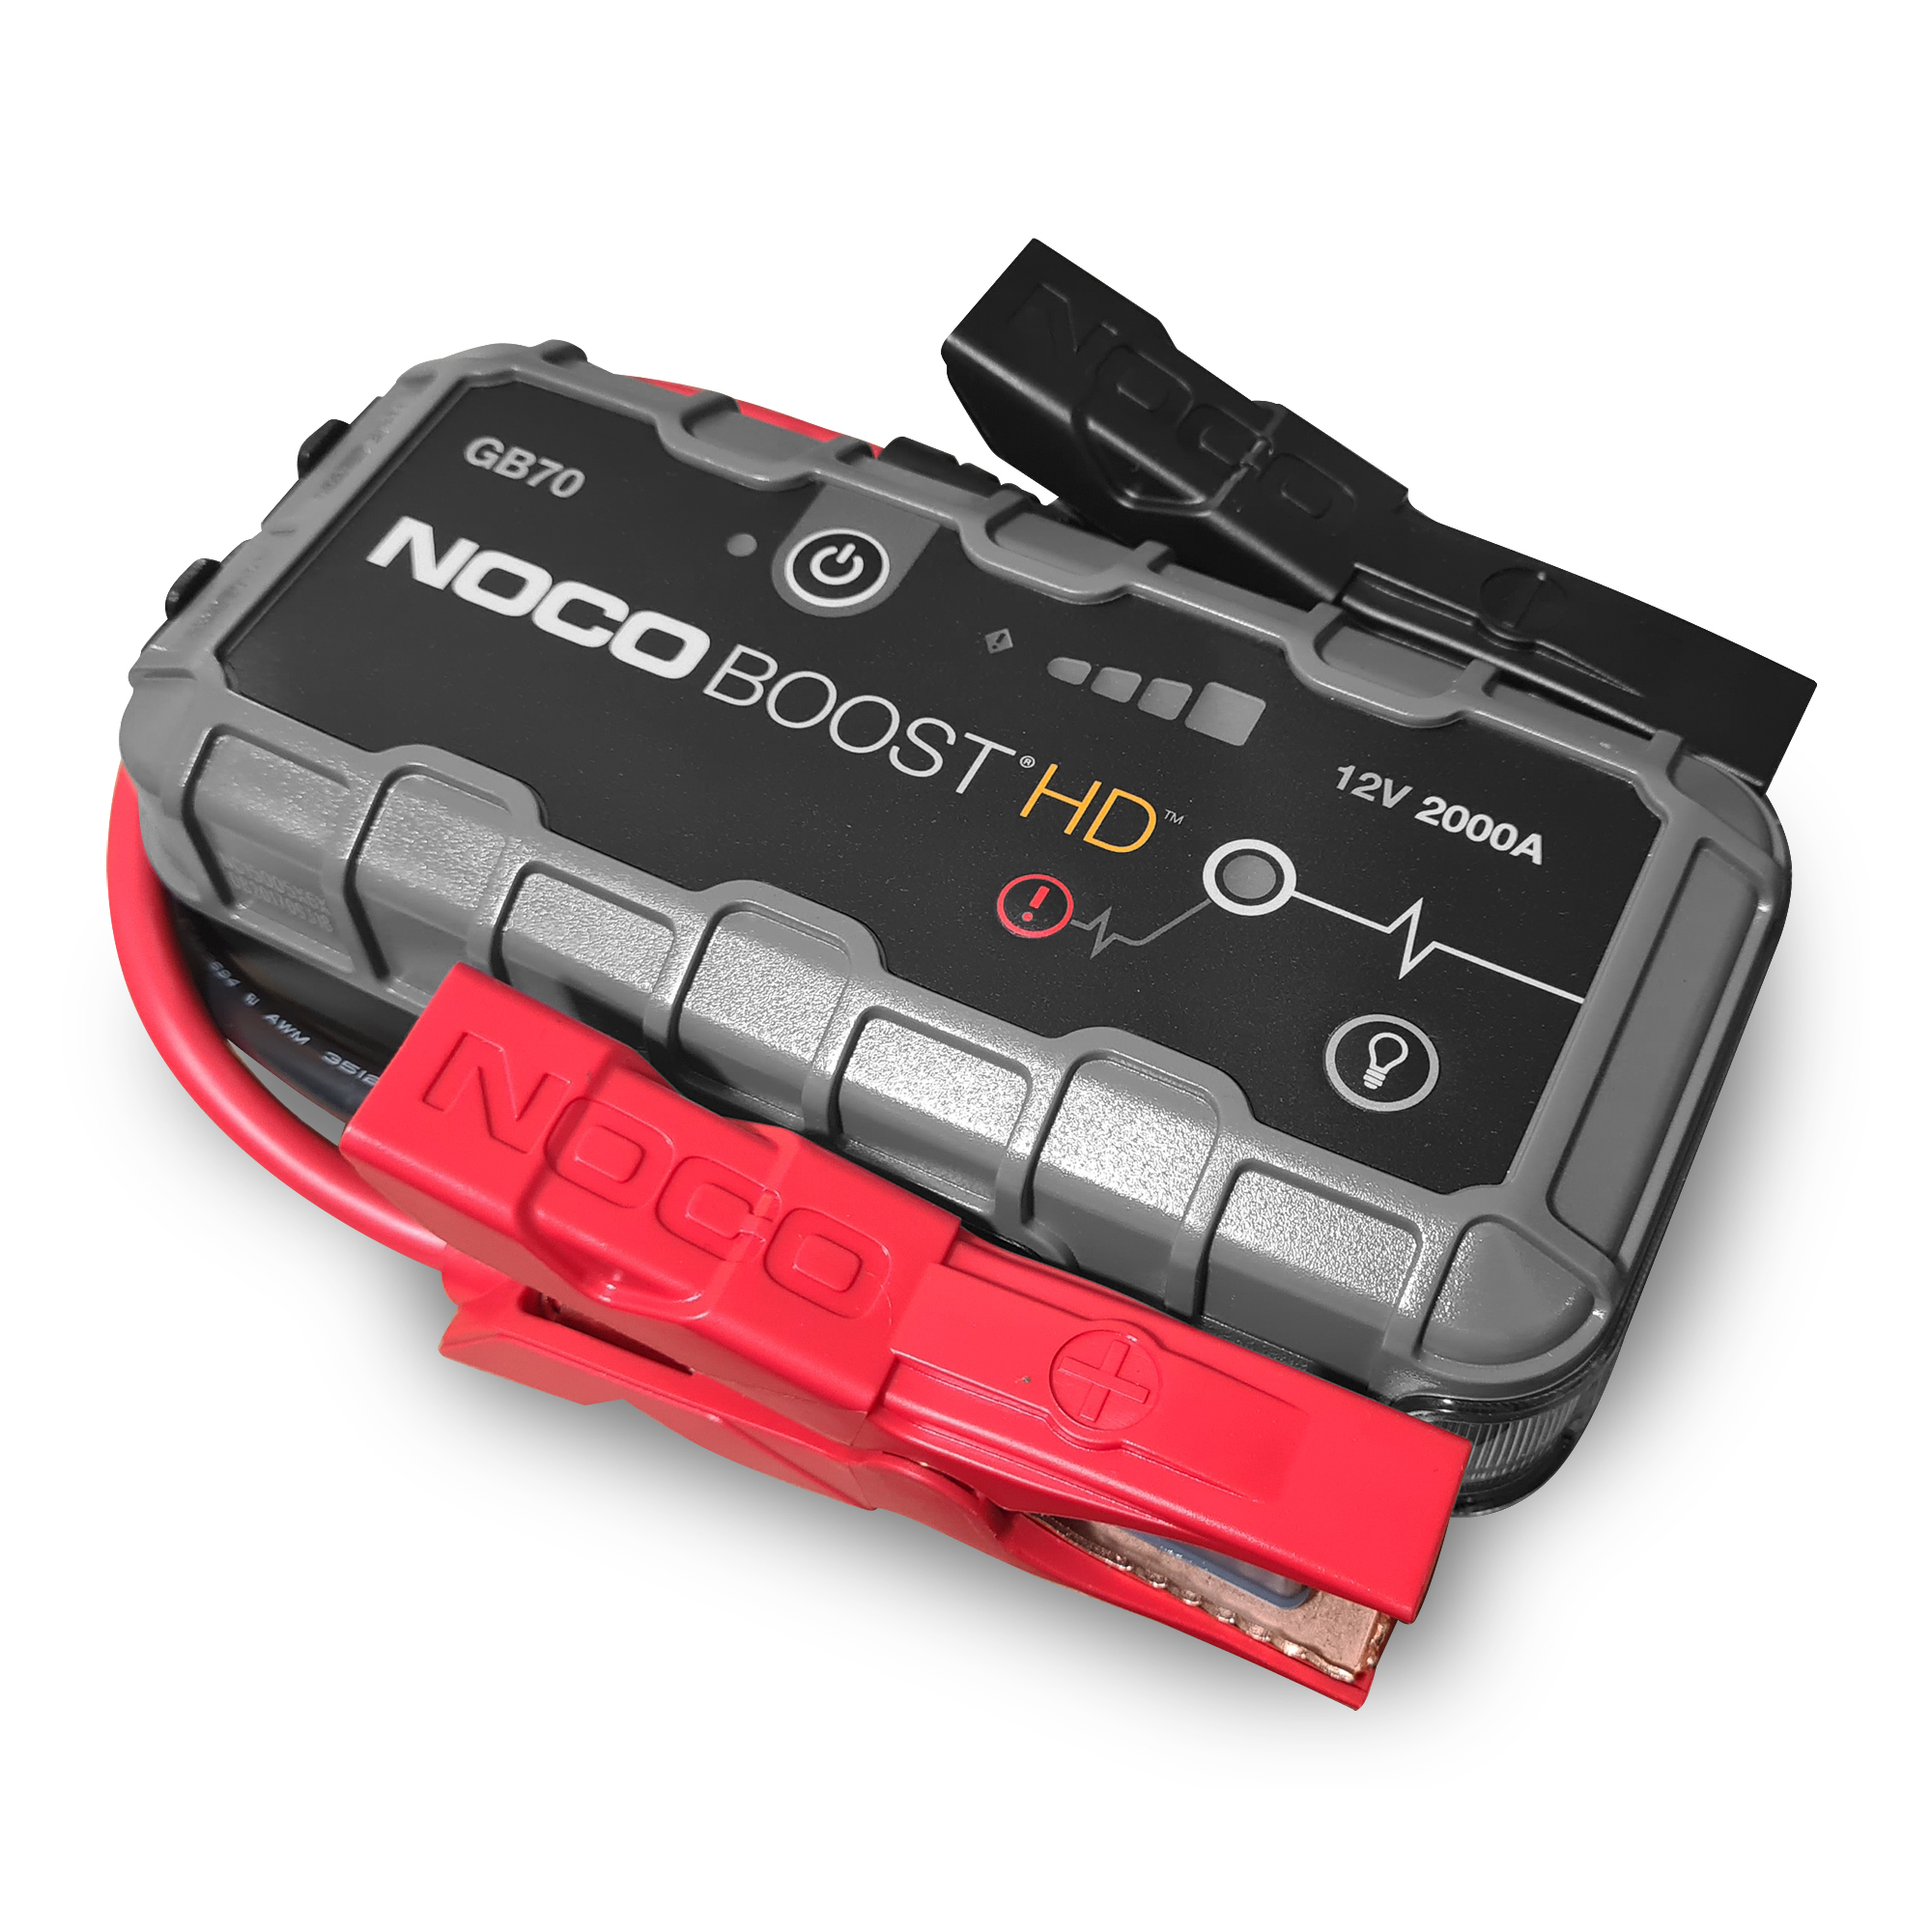 New Mexico Nomad : NOCO Boost HD GB70 2000 Amp 12-Volt UltraSafe Lithium  Jump Starter Box